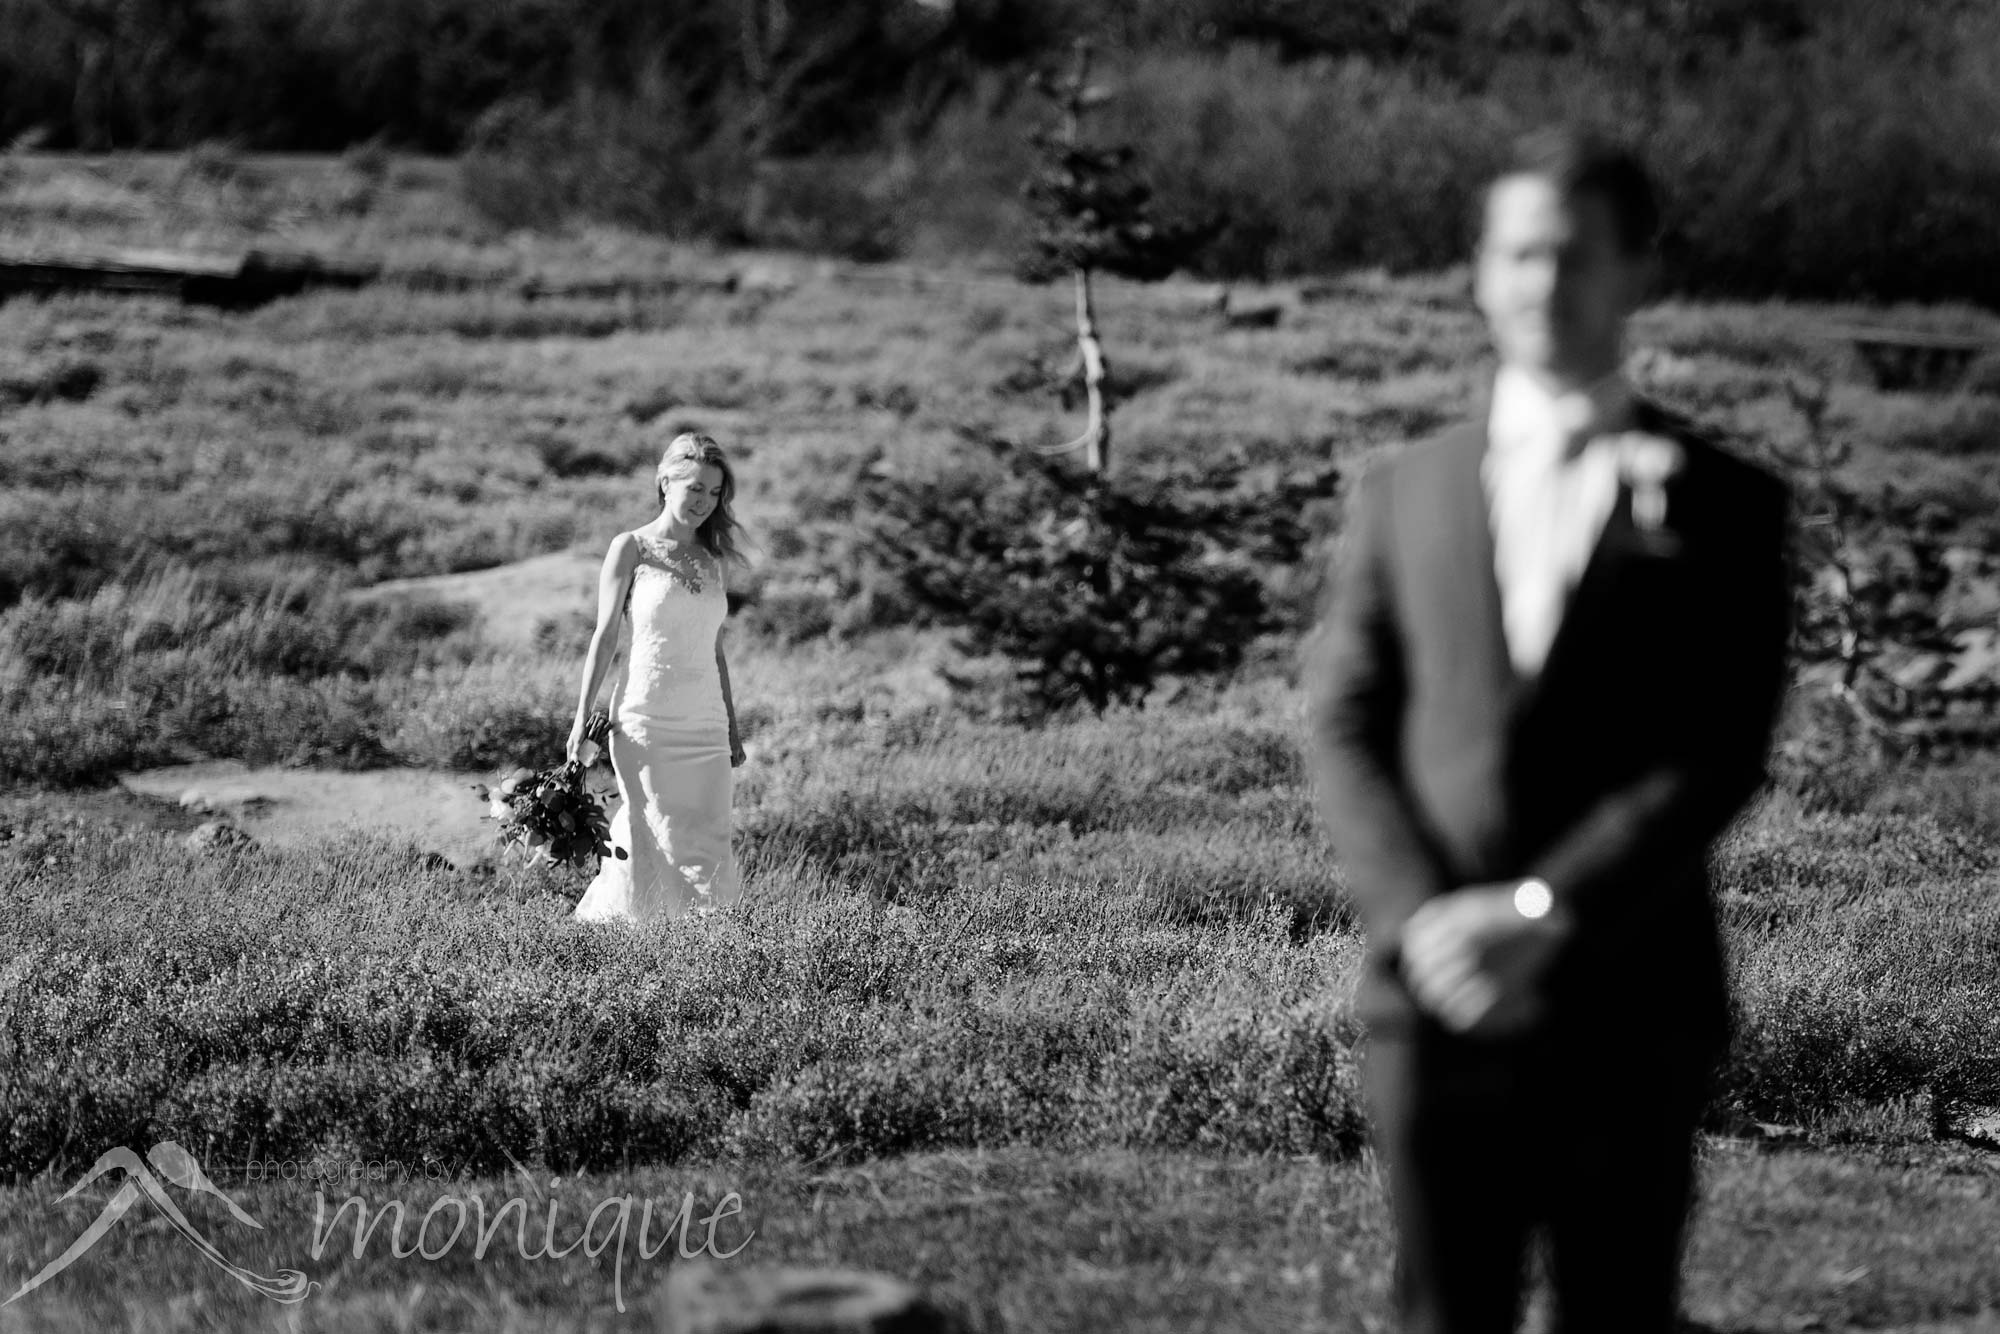 Lake Tahoe Covid-19 elopement photography featuring the bride and groom in the Tahoe Meadows by Photography by Monique adventure photographers 